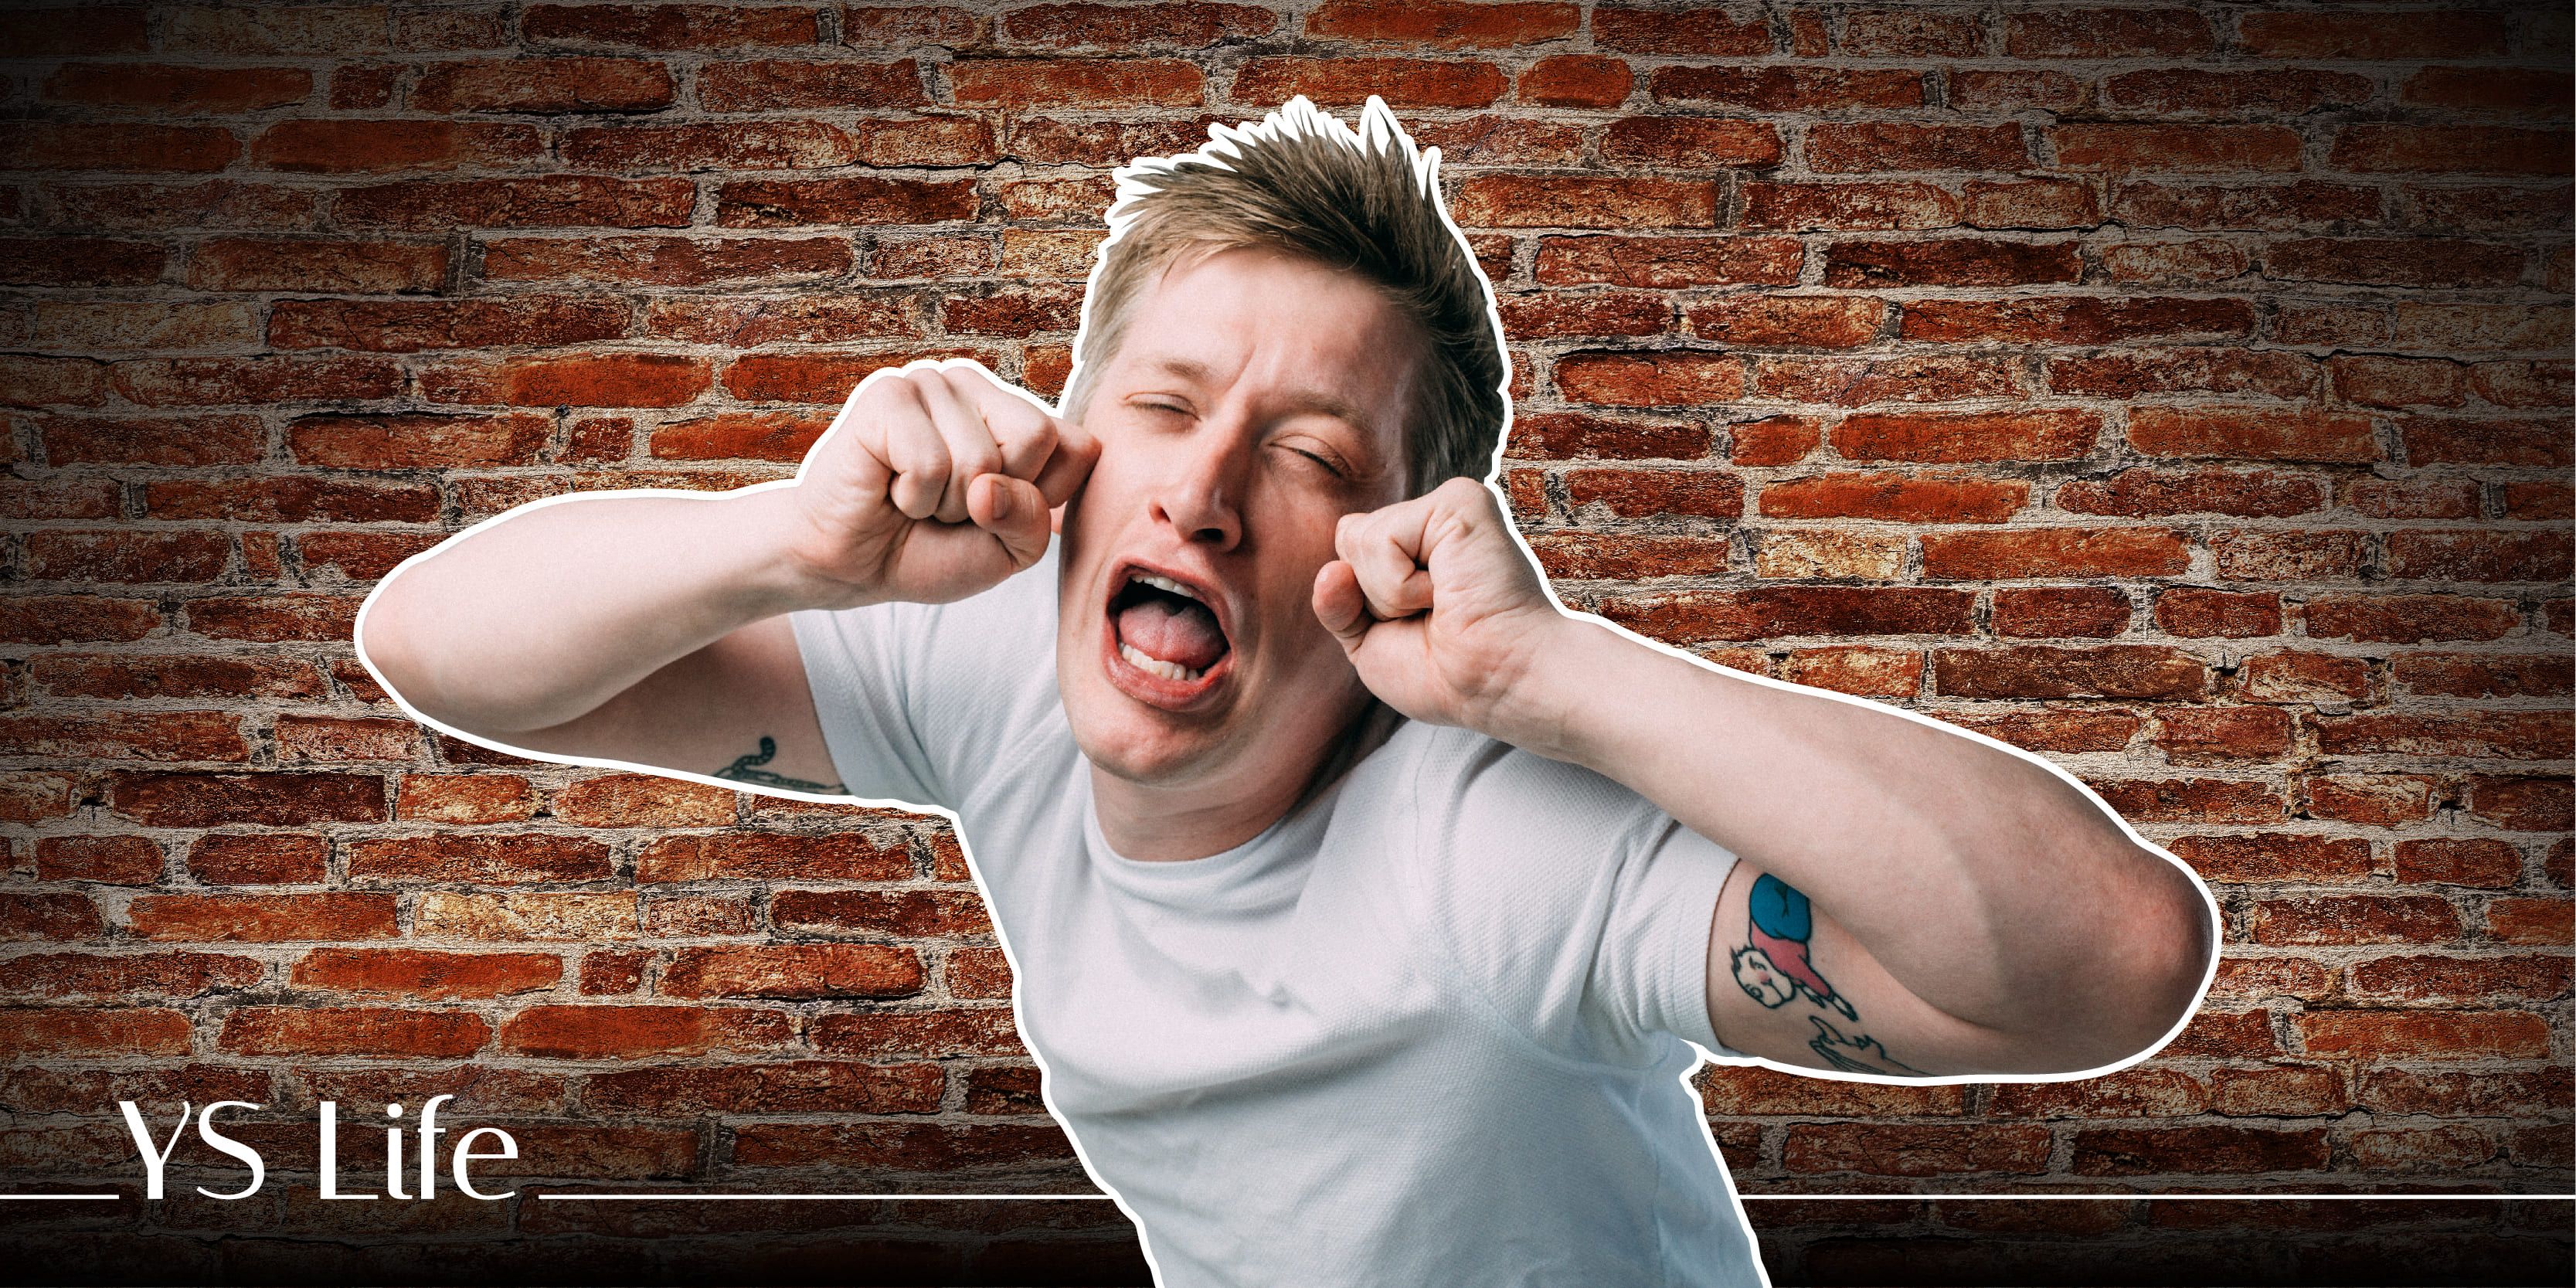 The Indian audience is more comedy-literate: Daniel Sloss